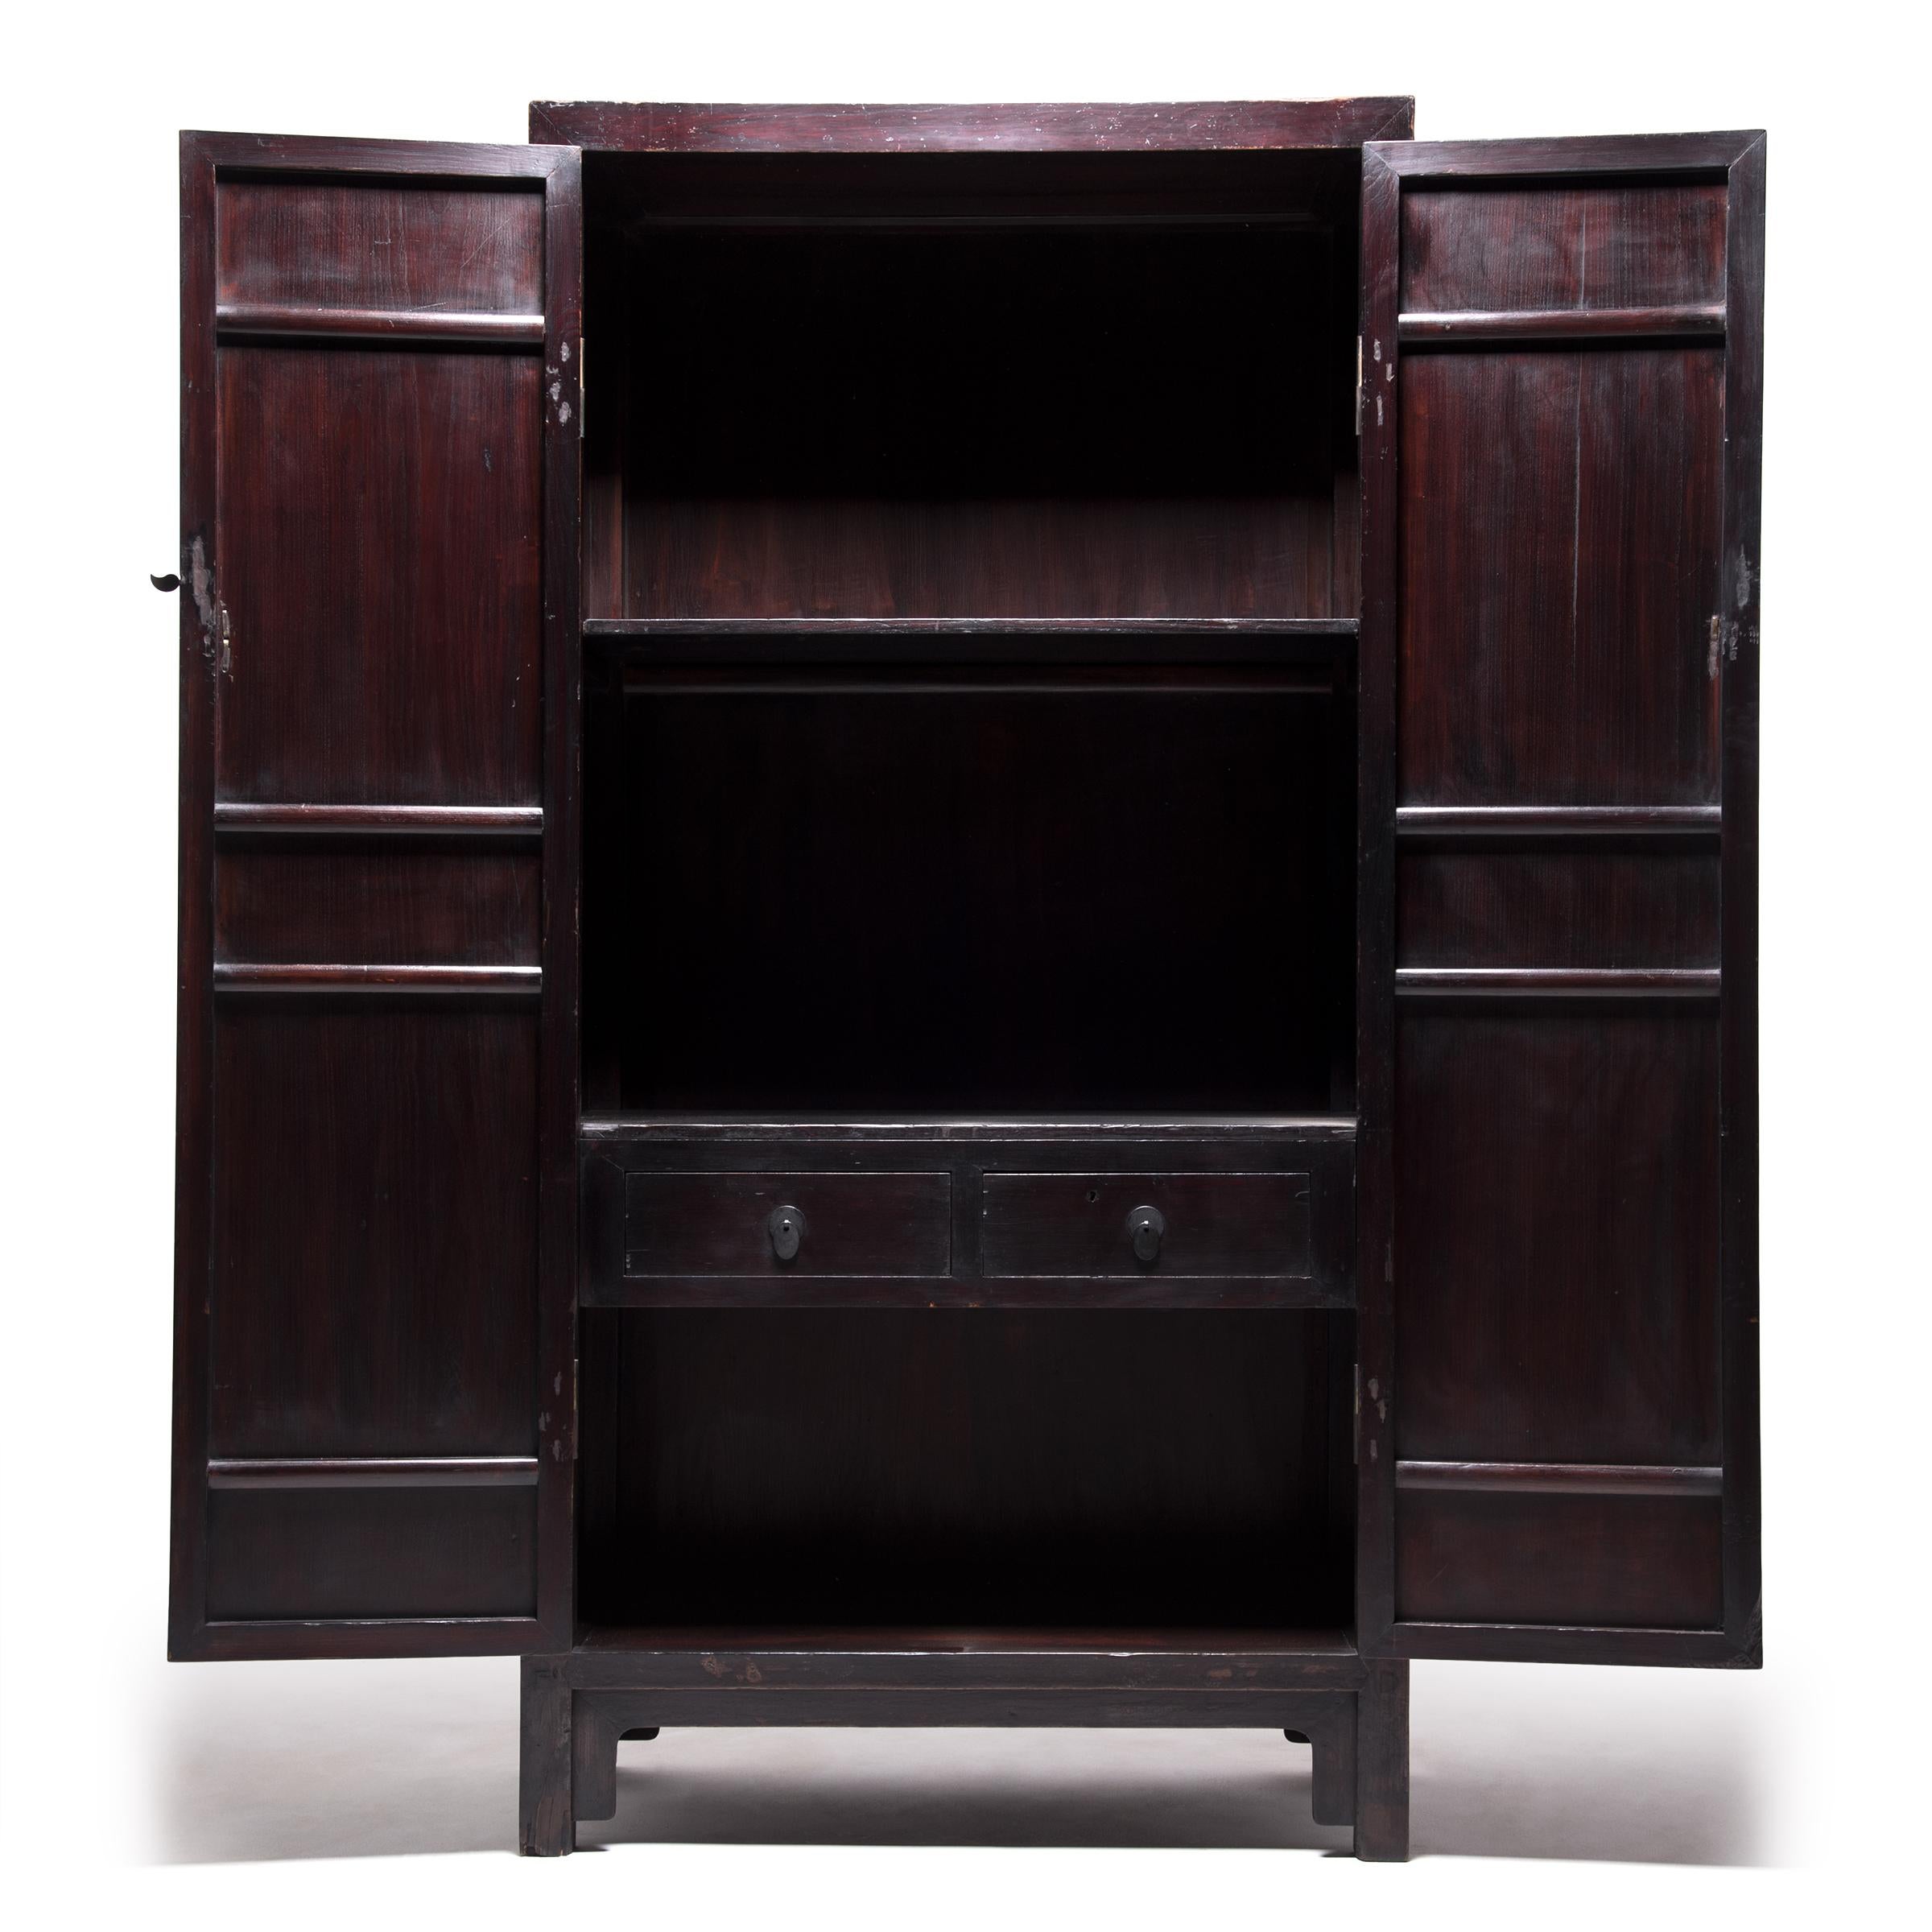 Chinois Grande armoire d'angle carre chinoise, vers 1850 en vente